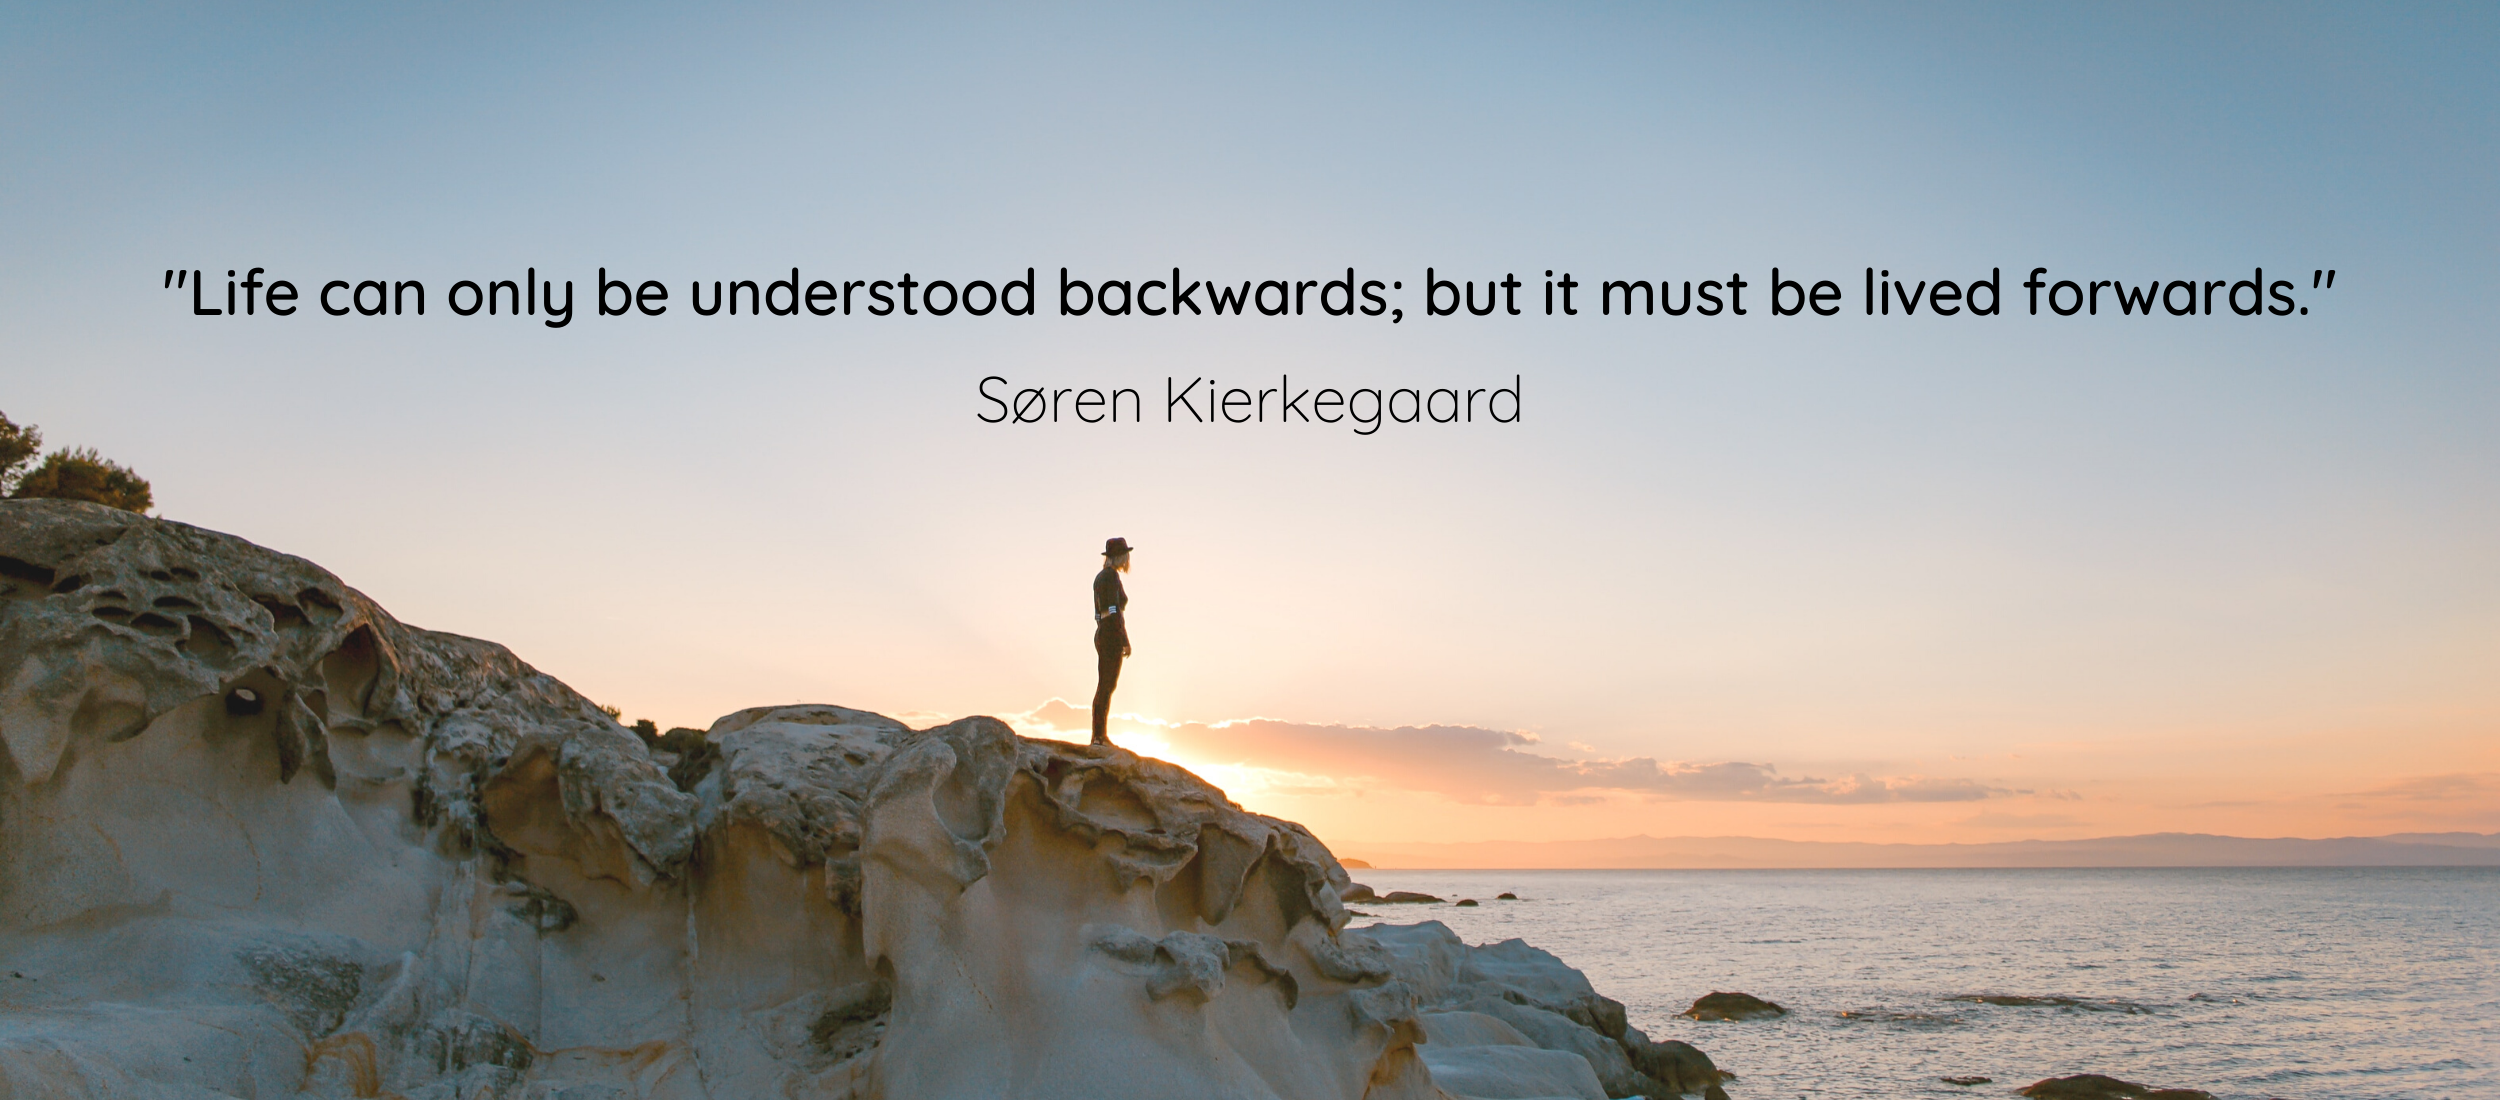 Quote overlayed on picture of a person at the costline watching the sunset over a rocky cliff. Soren Kierkegaard - "Life can only be understood backwards; but must be lived forwards"